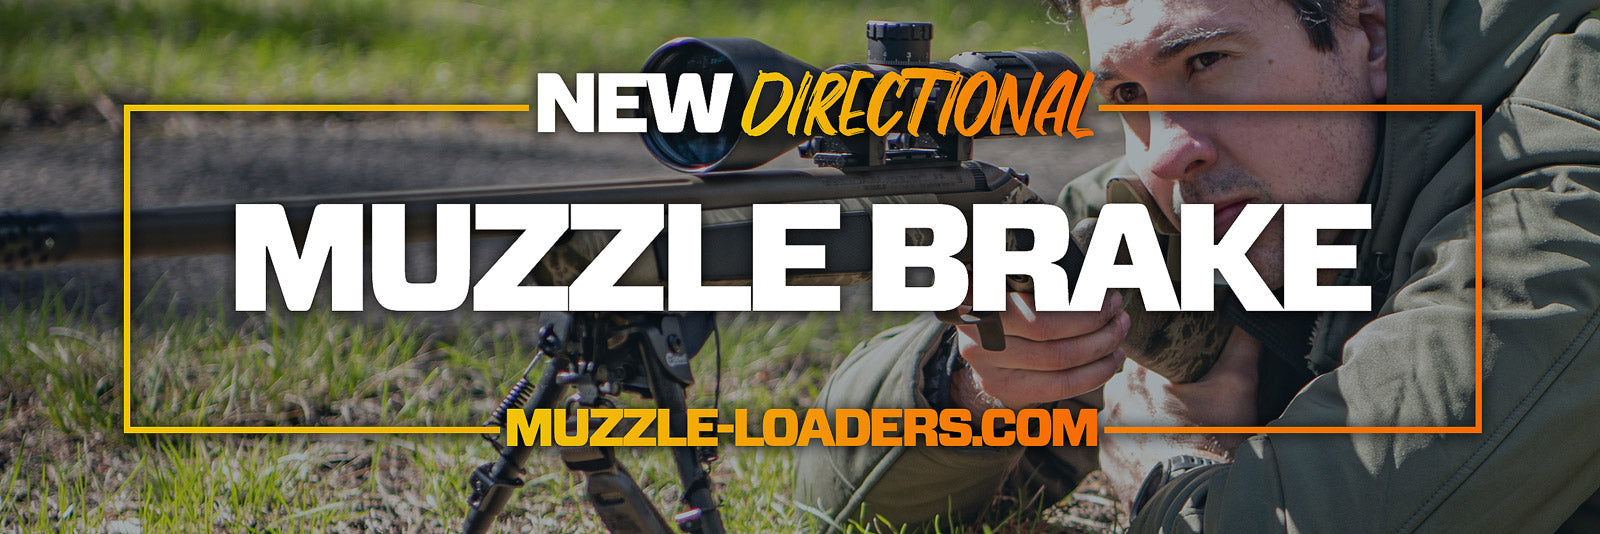 The New Muzzle-Loaders™ Muzzle Brake - Product Overview